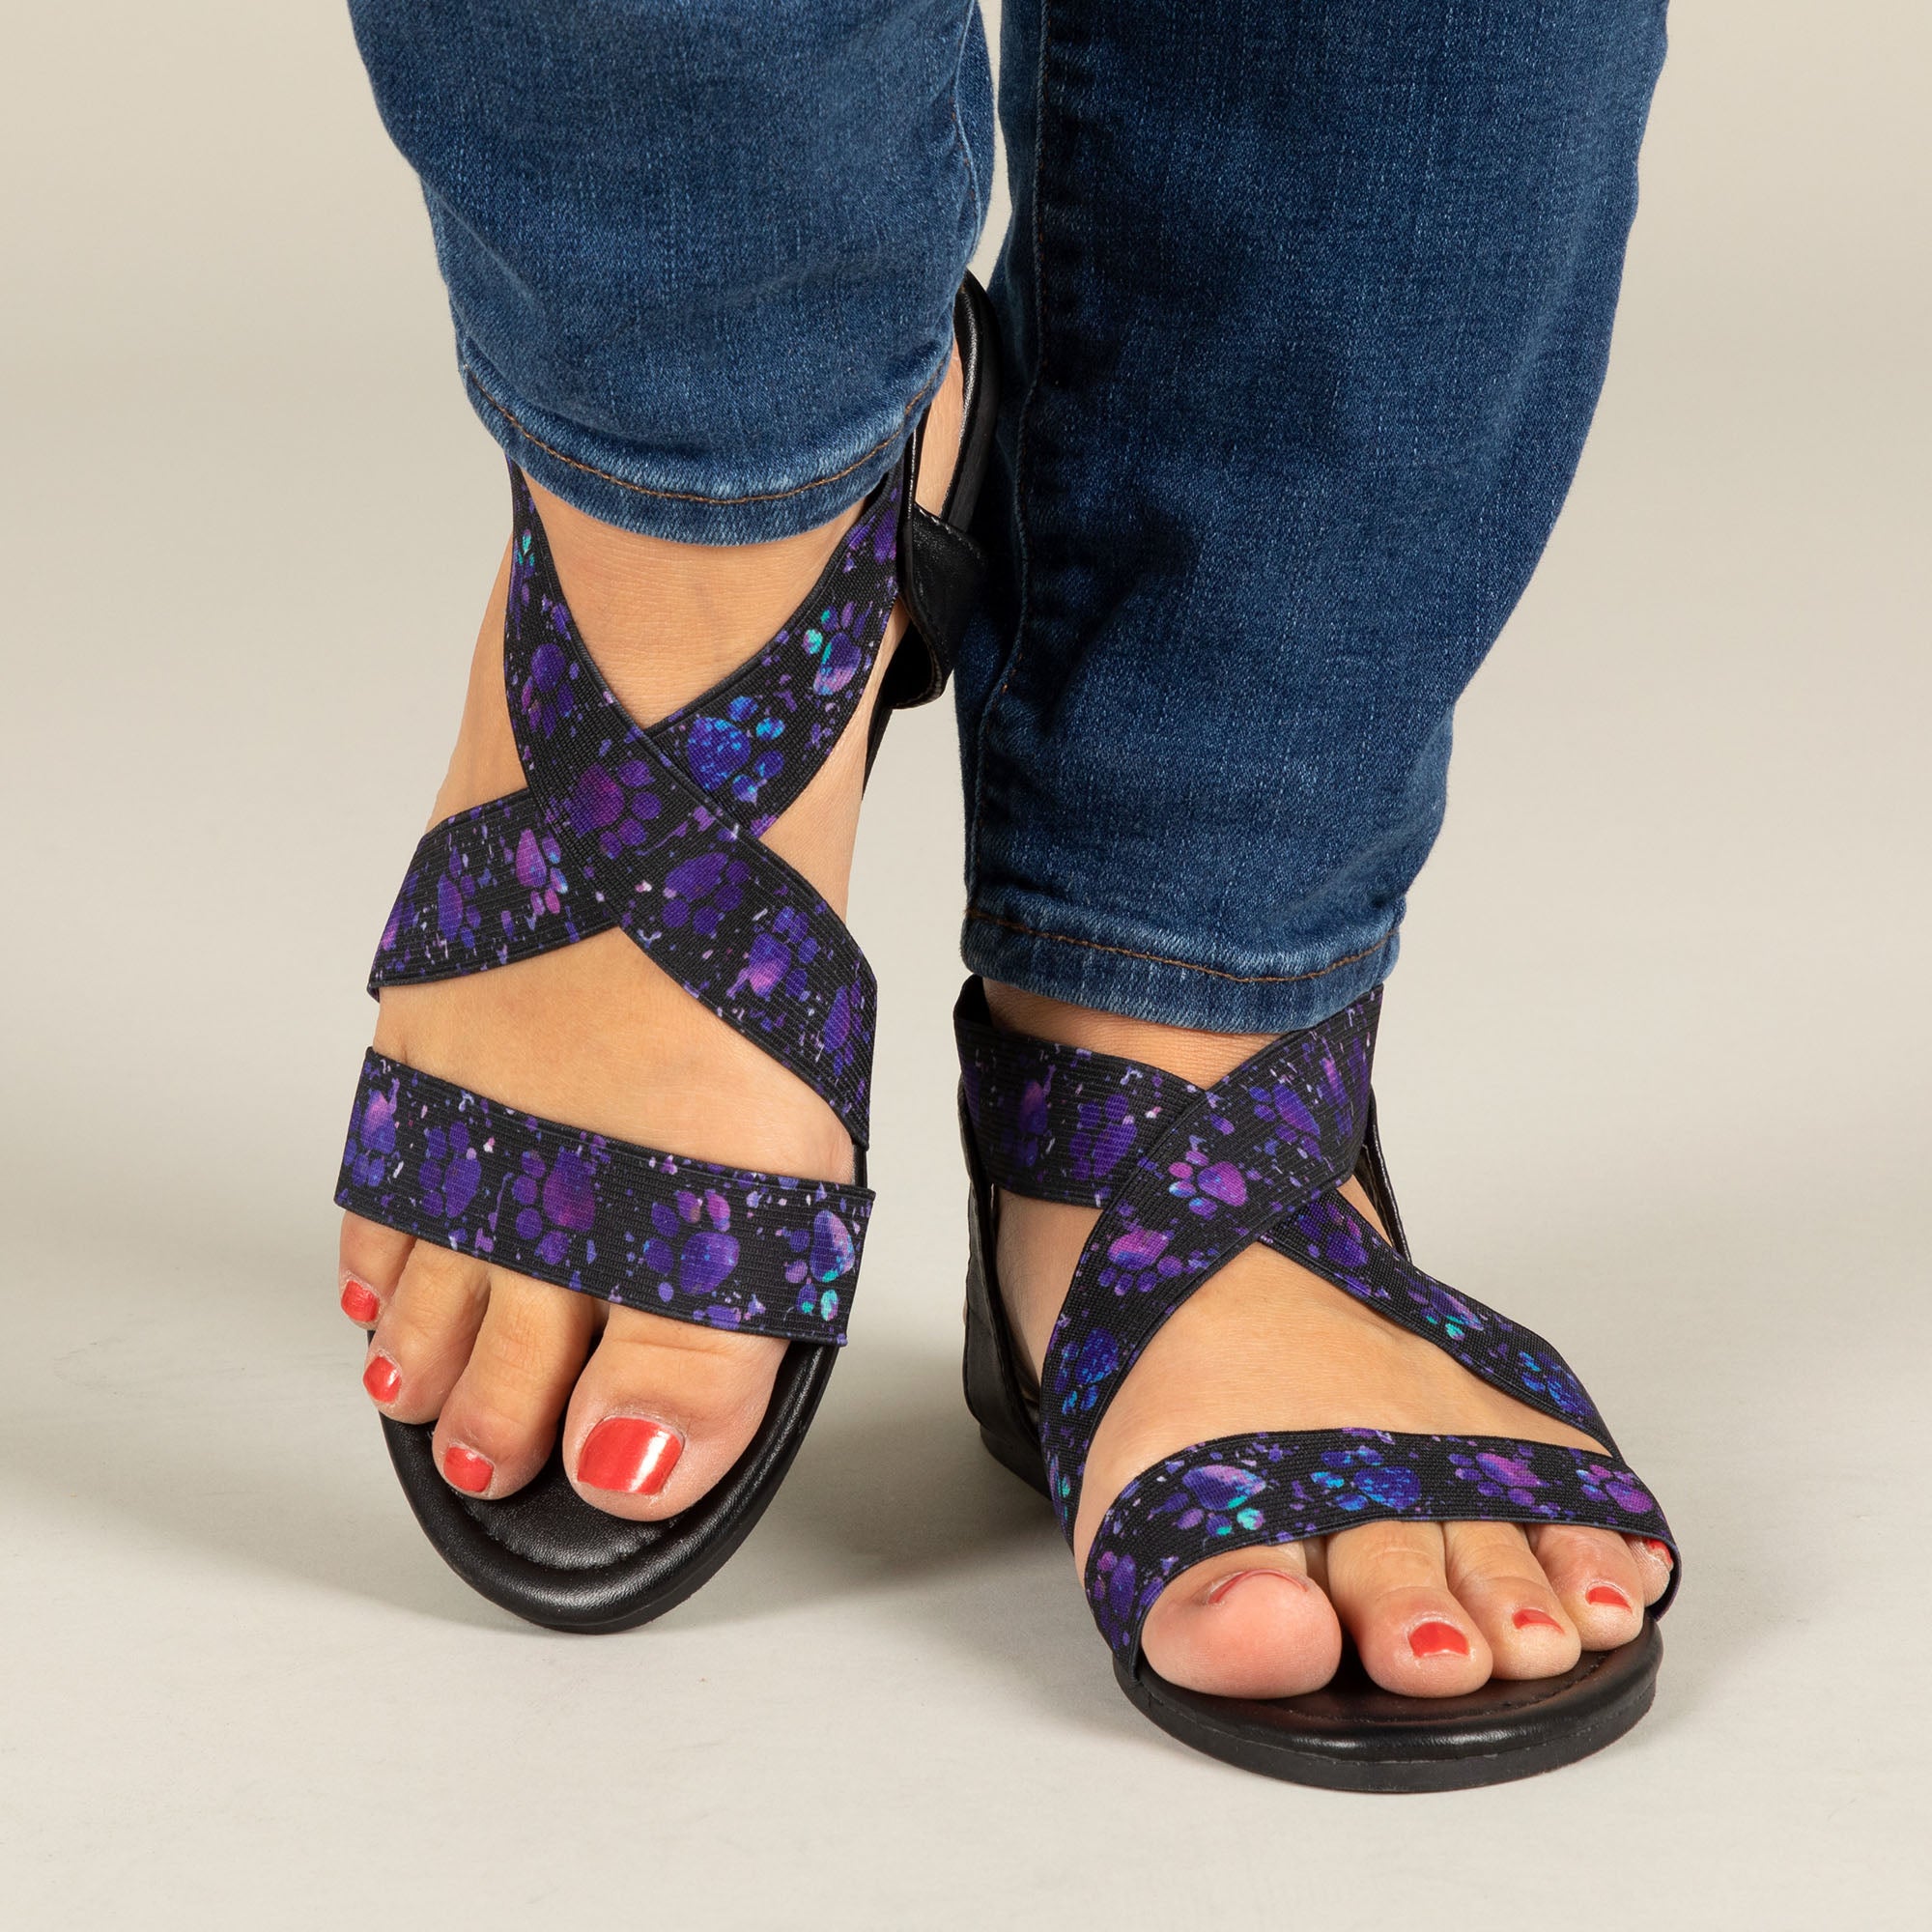 Pawsitively Stretchy Sandals - Painted Paws - 8